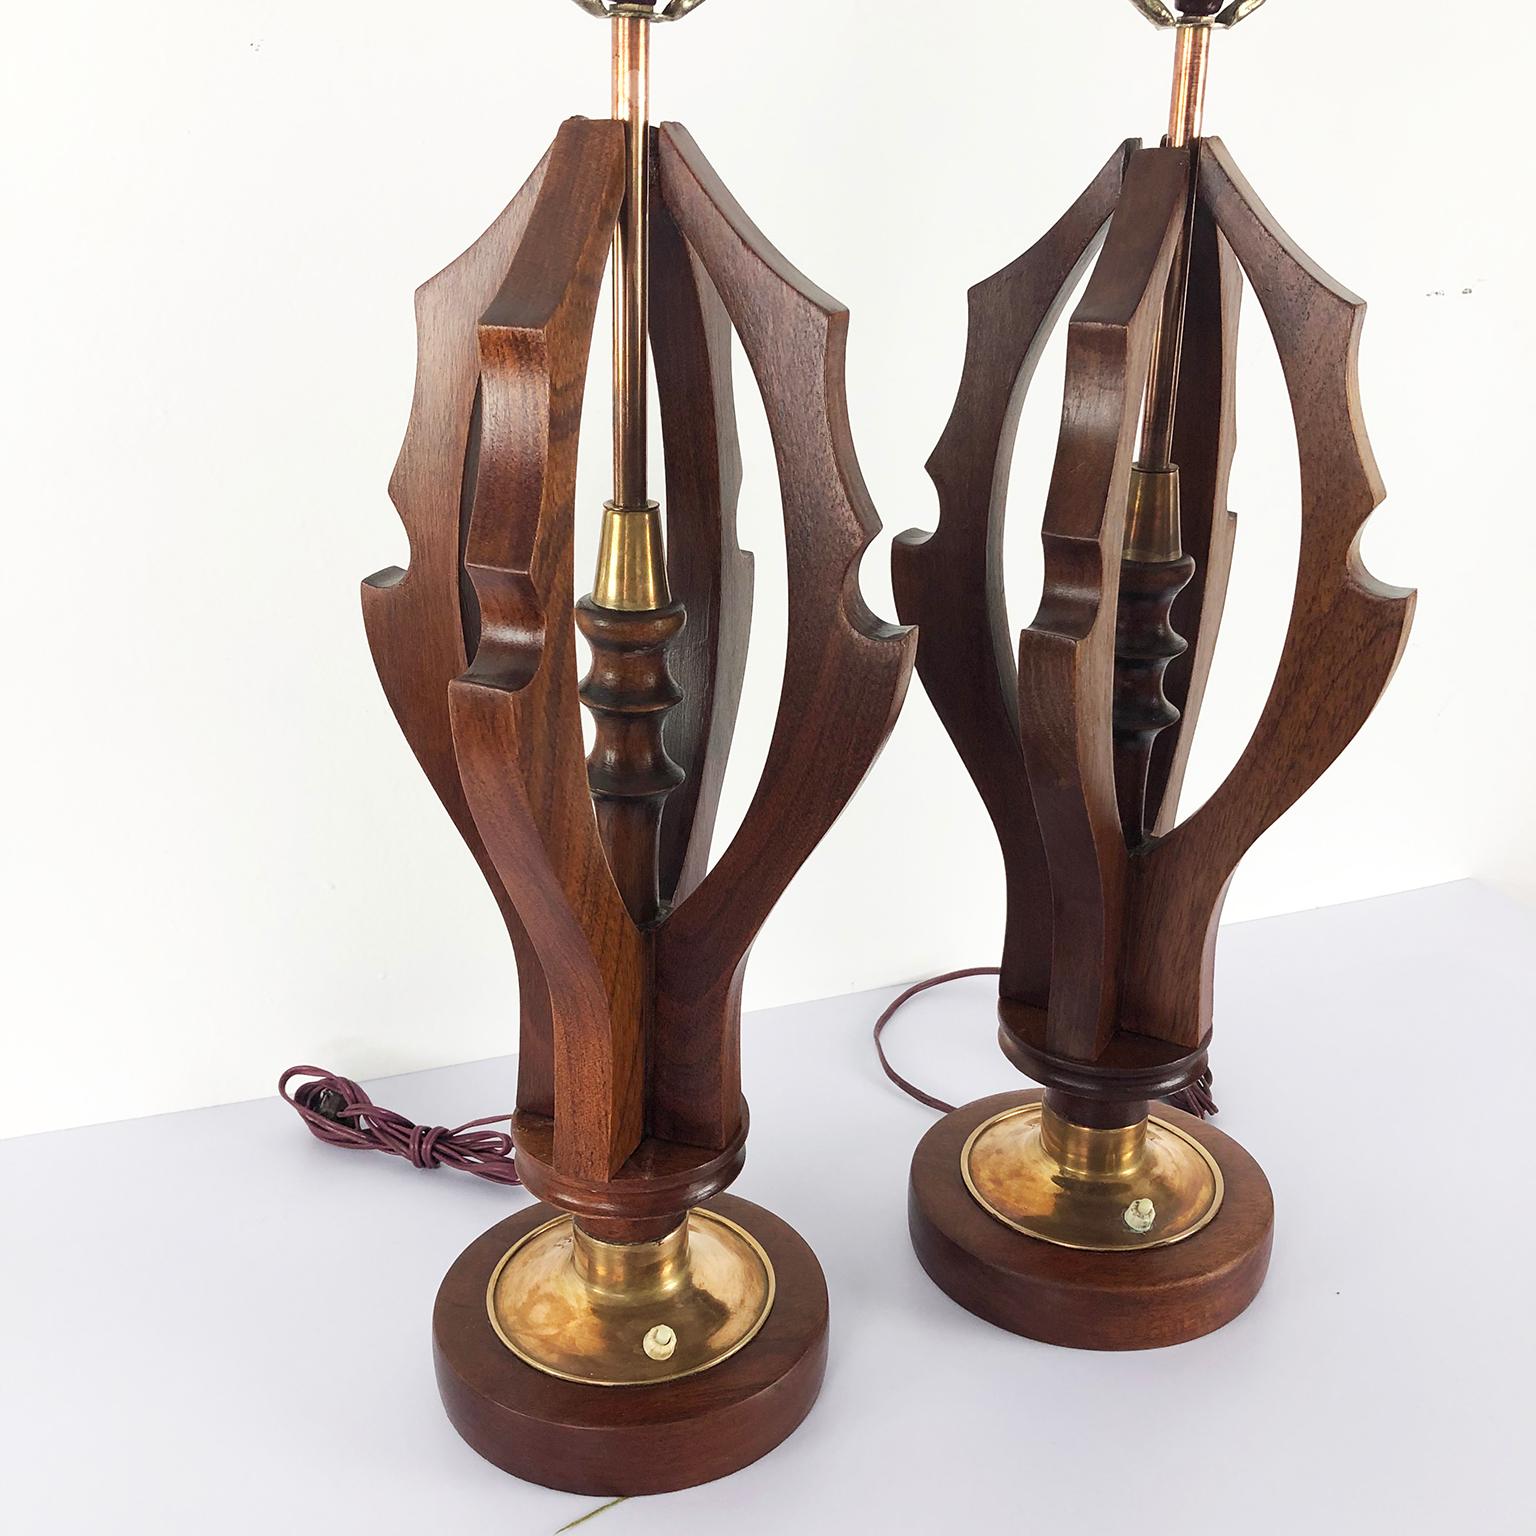 We offer this amazing a pair of midcentury Mexican modern table lamps in the style of Arturo Pani both are constructed with solid mahogany and brass accents, the lamps have been restored and rewired, circa 1950. No shades included.